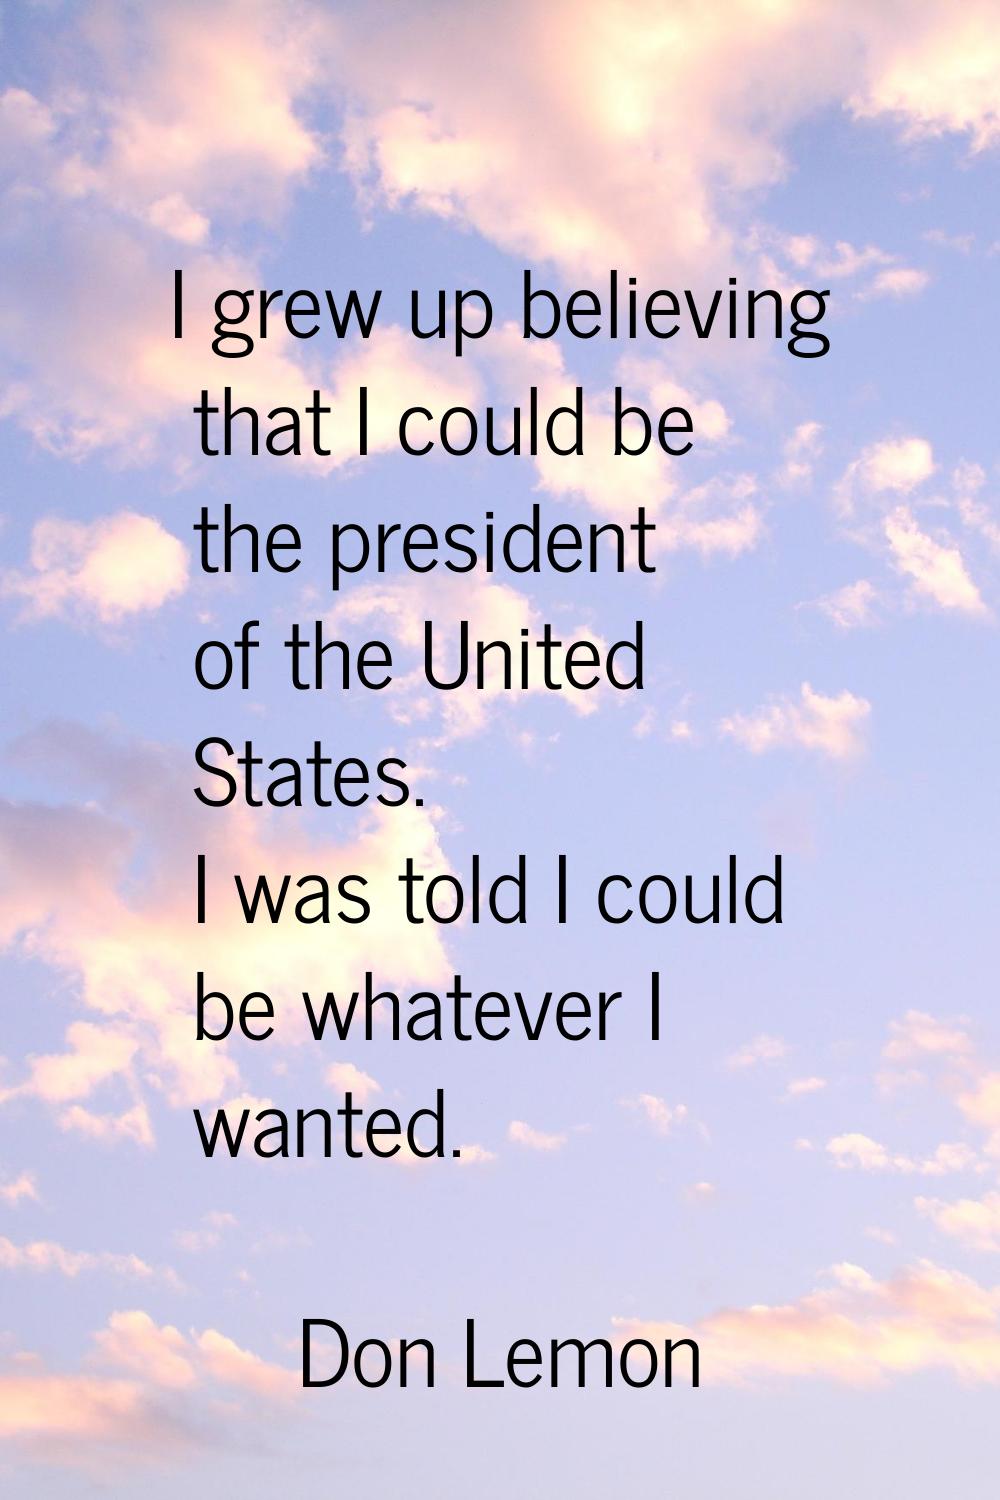 I grew up believing that I could be the president of the United States. I was told I could be whate